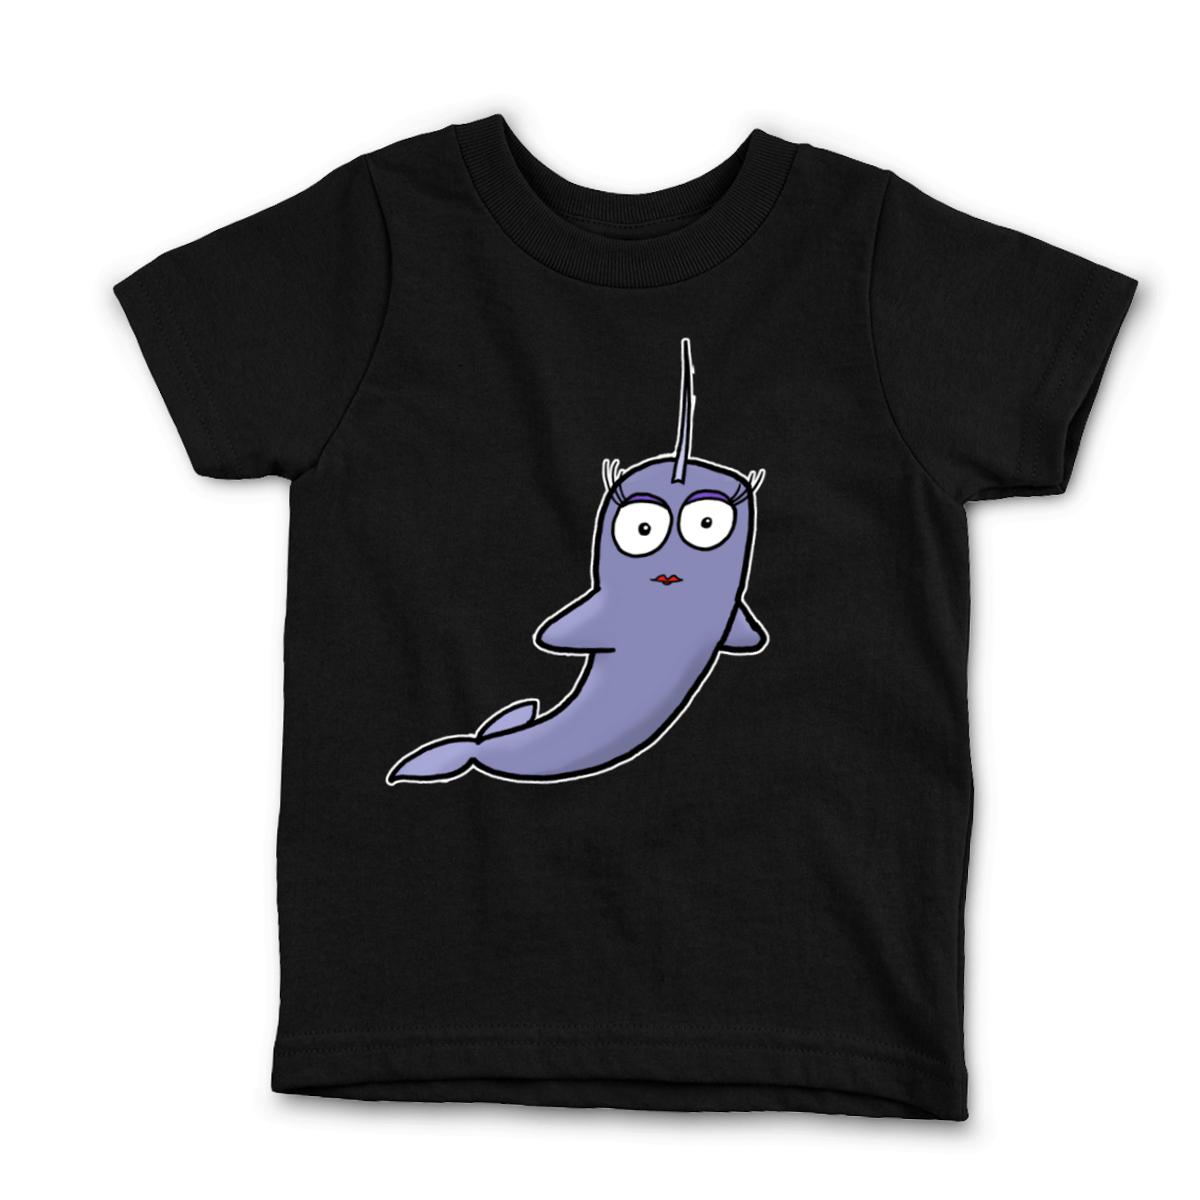 Narwhal Kid's Tee Small black